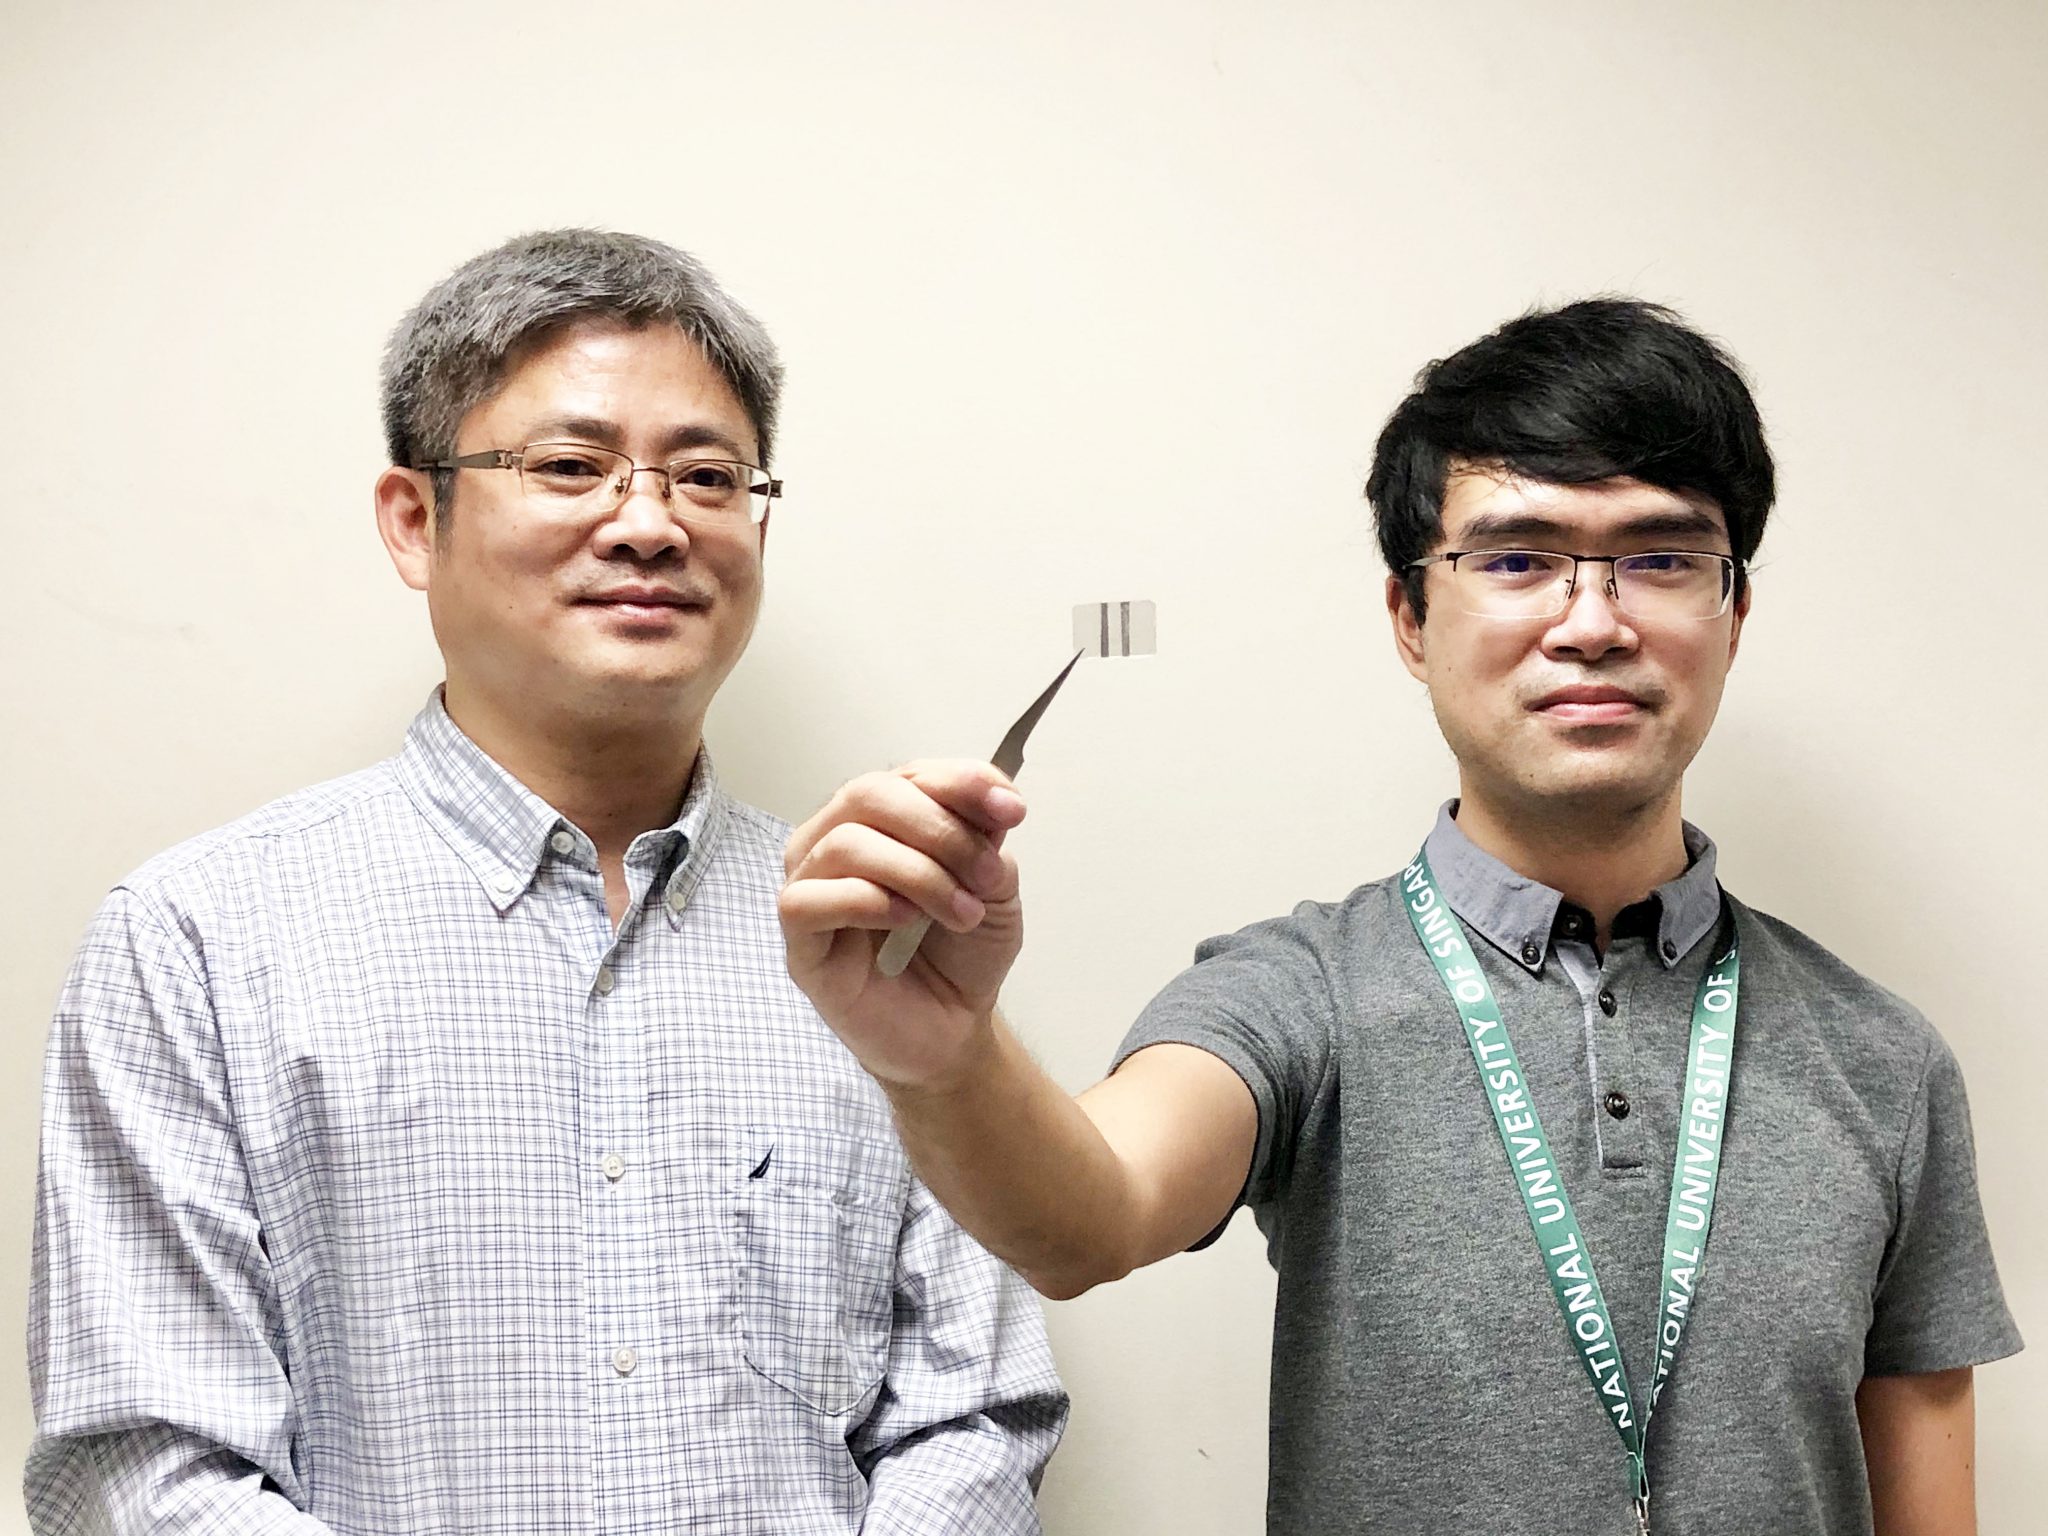 Associate Professor Ouyang Jianyong and Dr Cheng Hanlin of the Department of Materials Science and Engineering at NUS